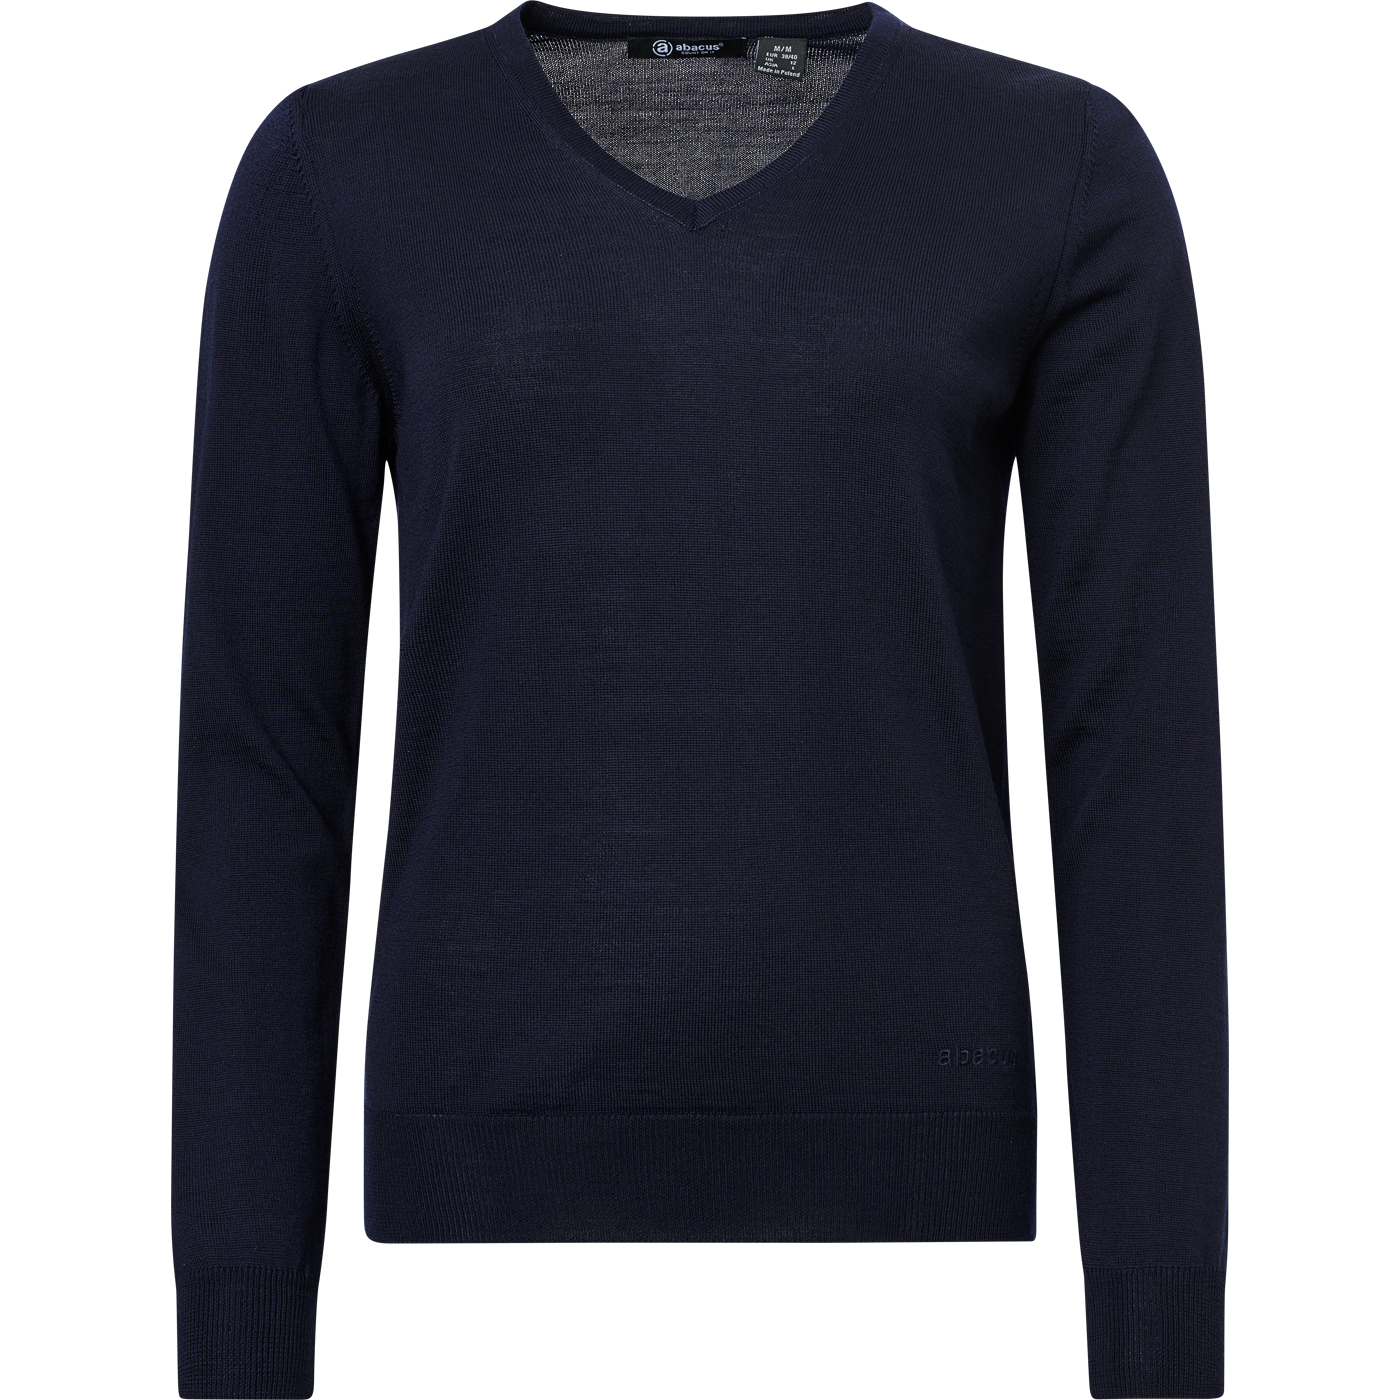 Lds Milano pullover - navy in the group WOMEN / All clothing at Abacus Sportswear (4242300)